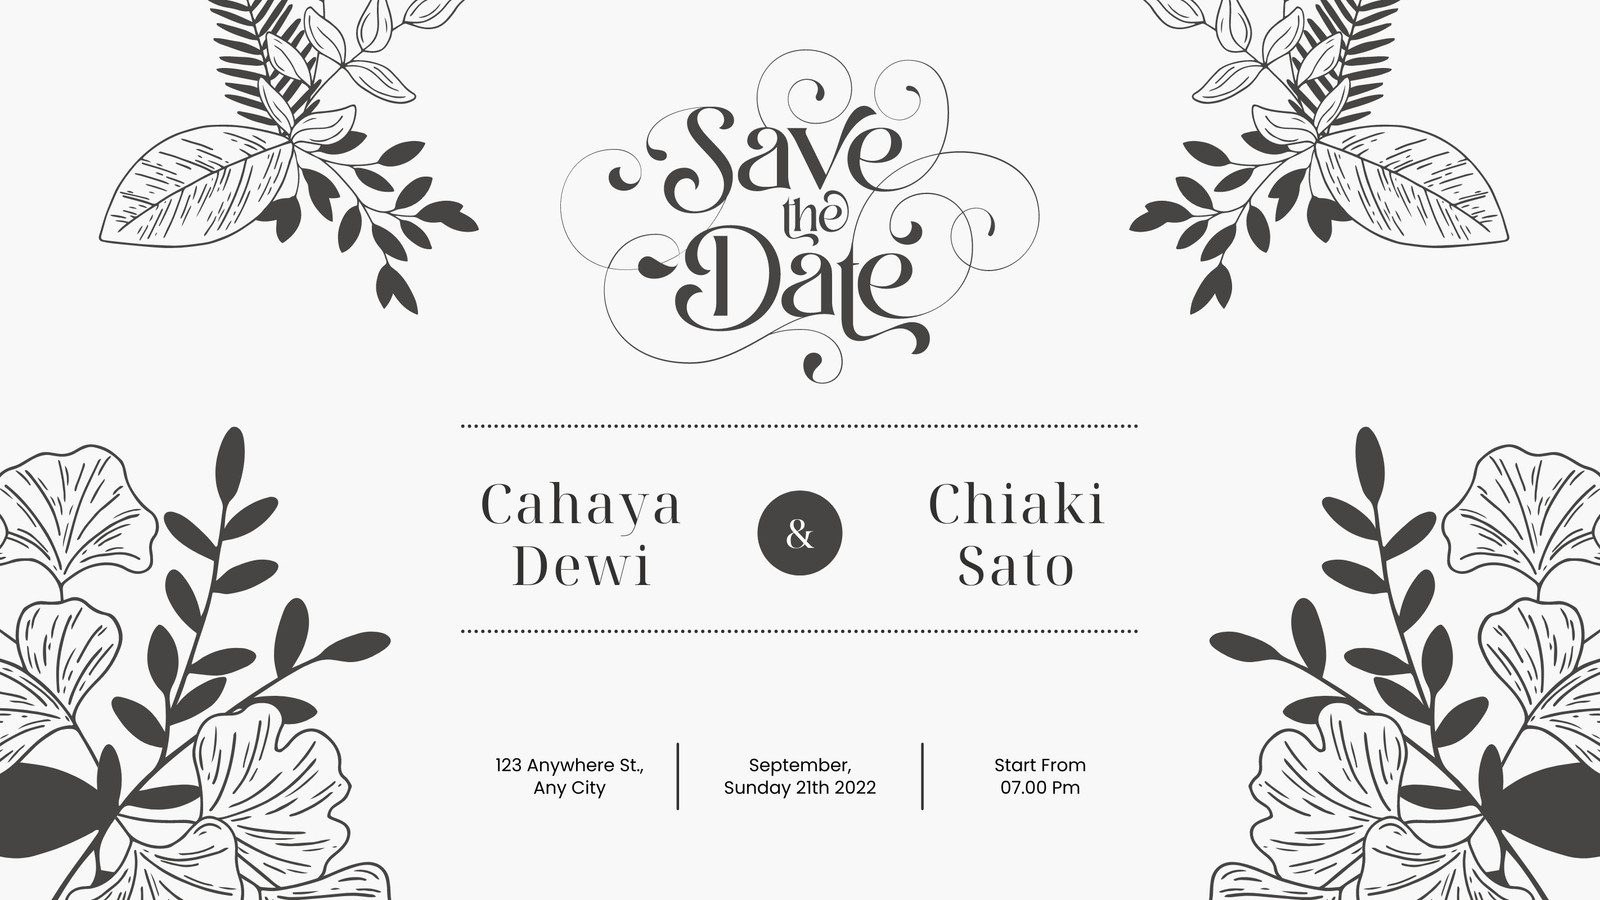 Customize 50+ Save The Date Videos Templates Online - Canva